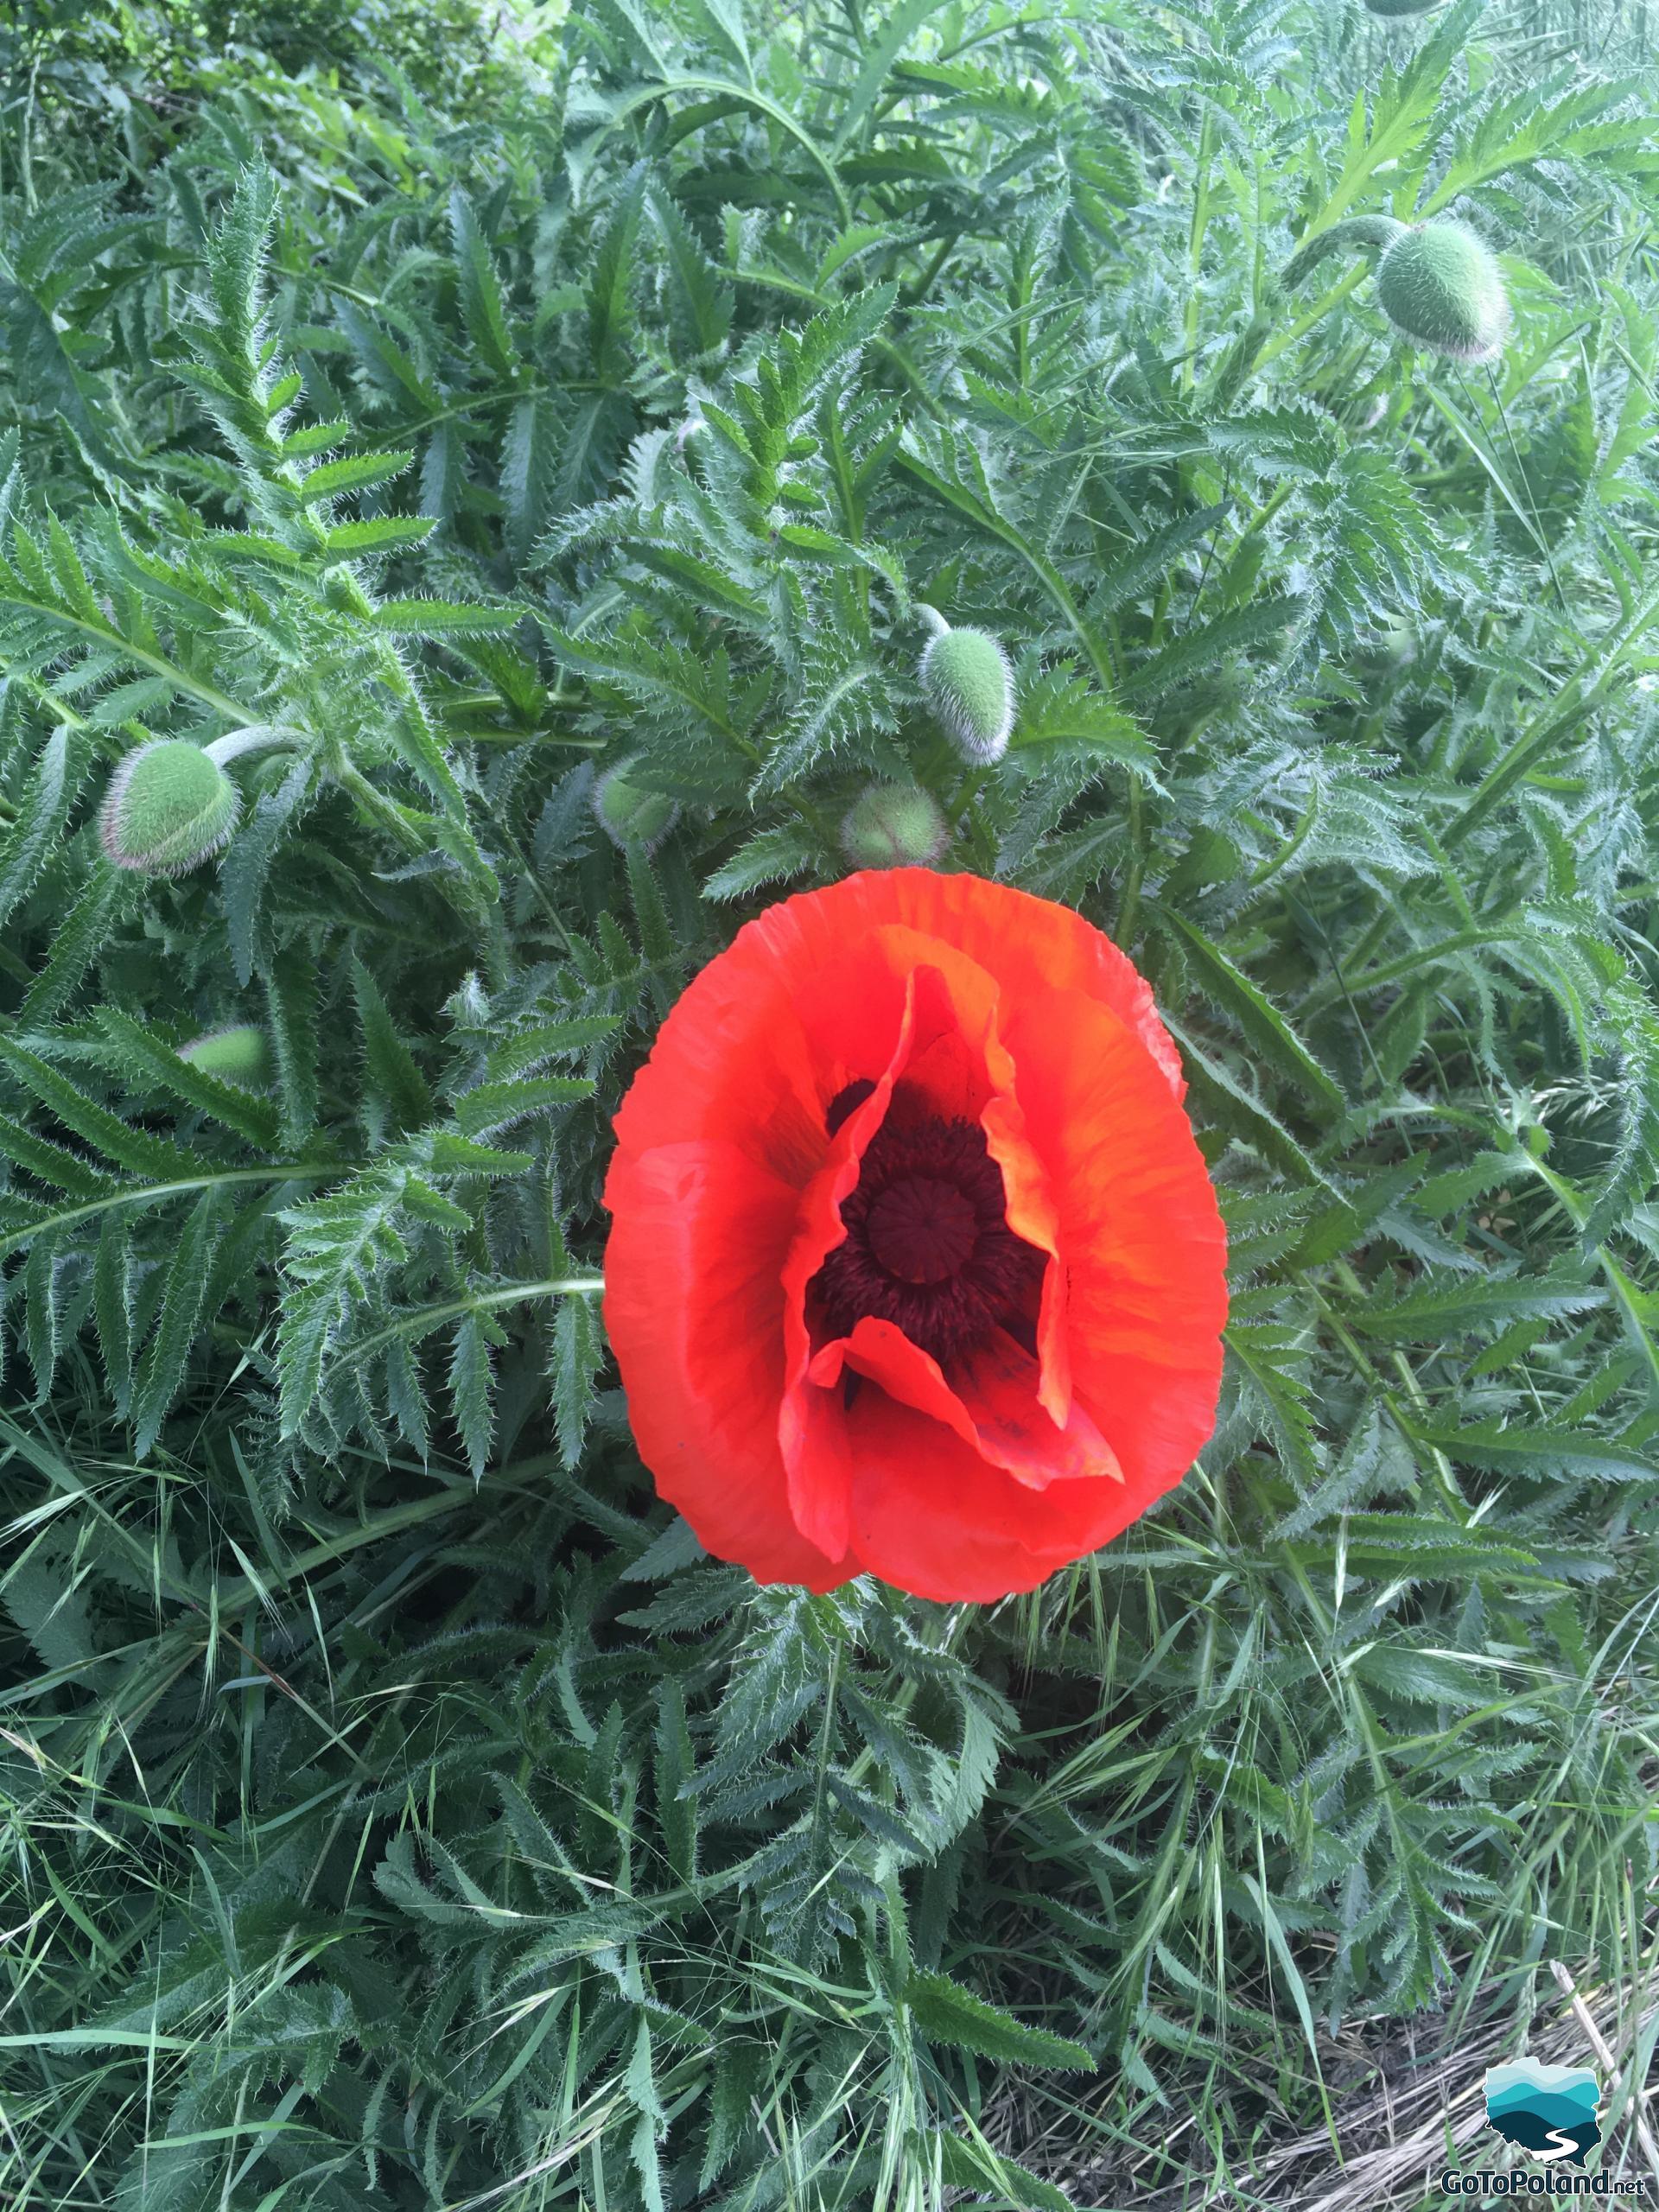 A red poppy growing between the grasses